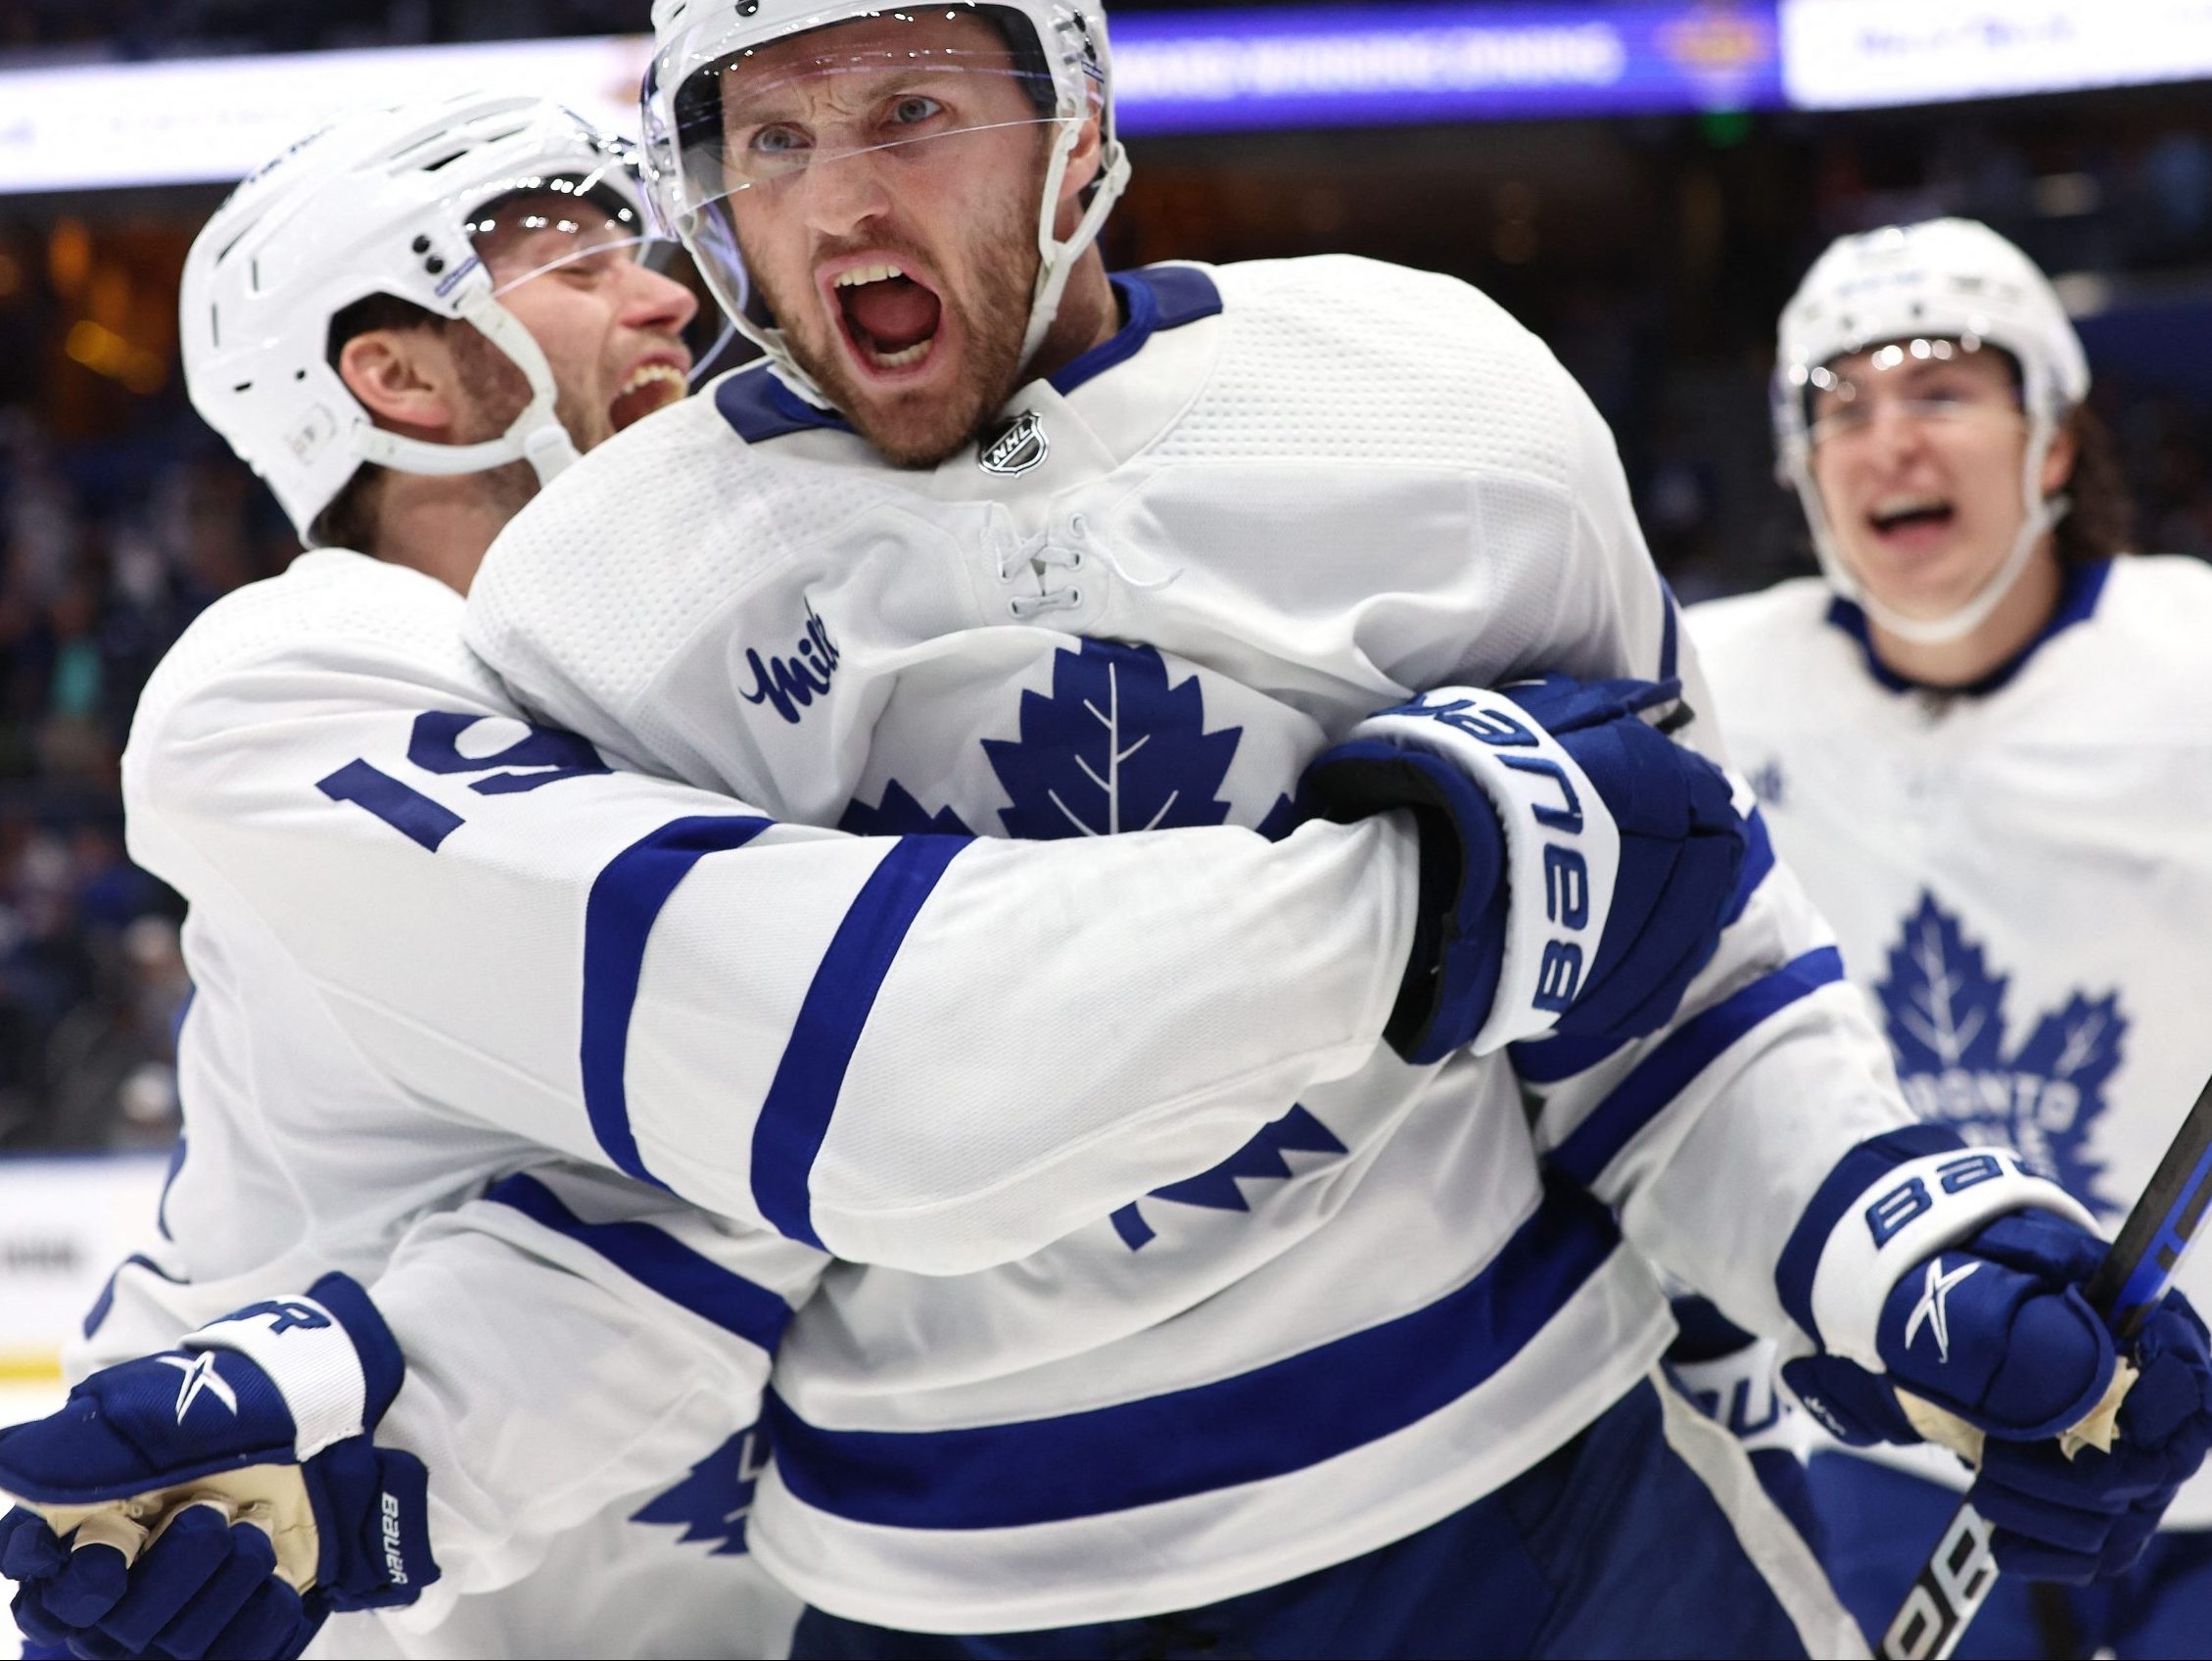 Lightning take an emotional lead for the Cup